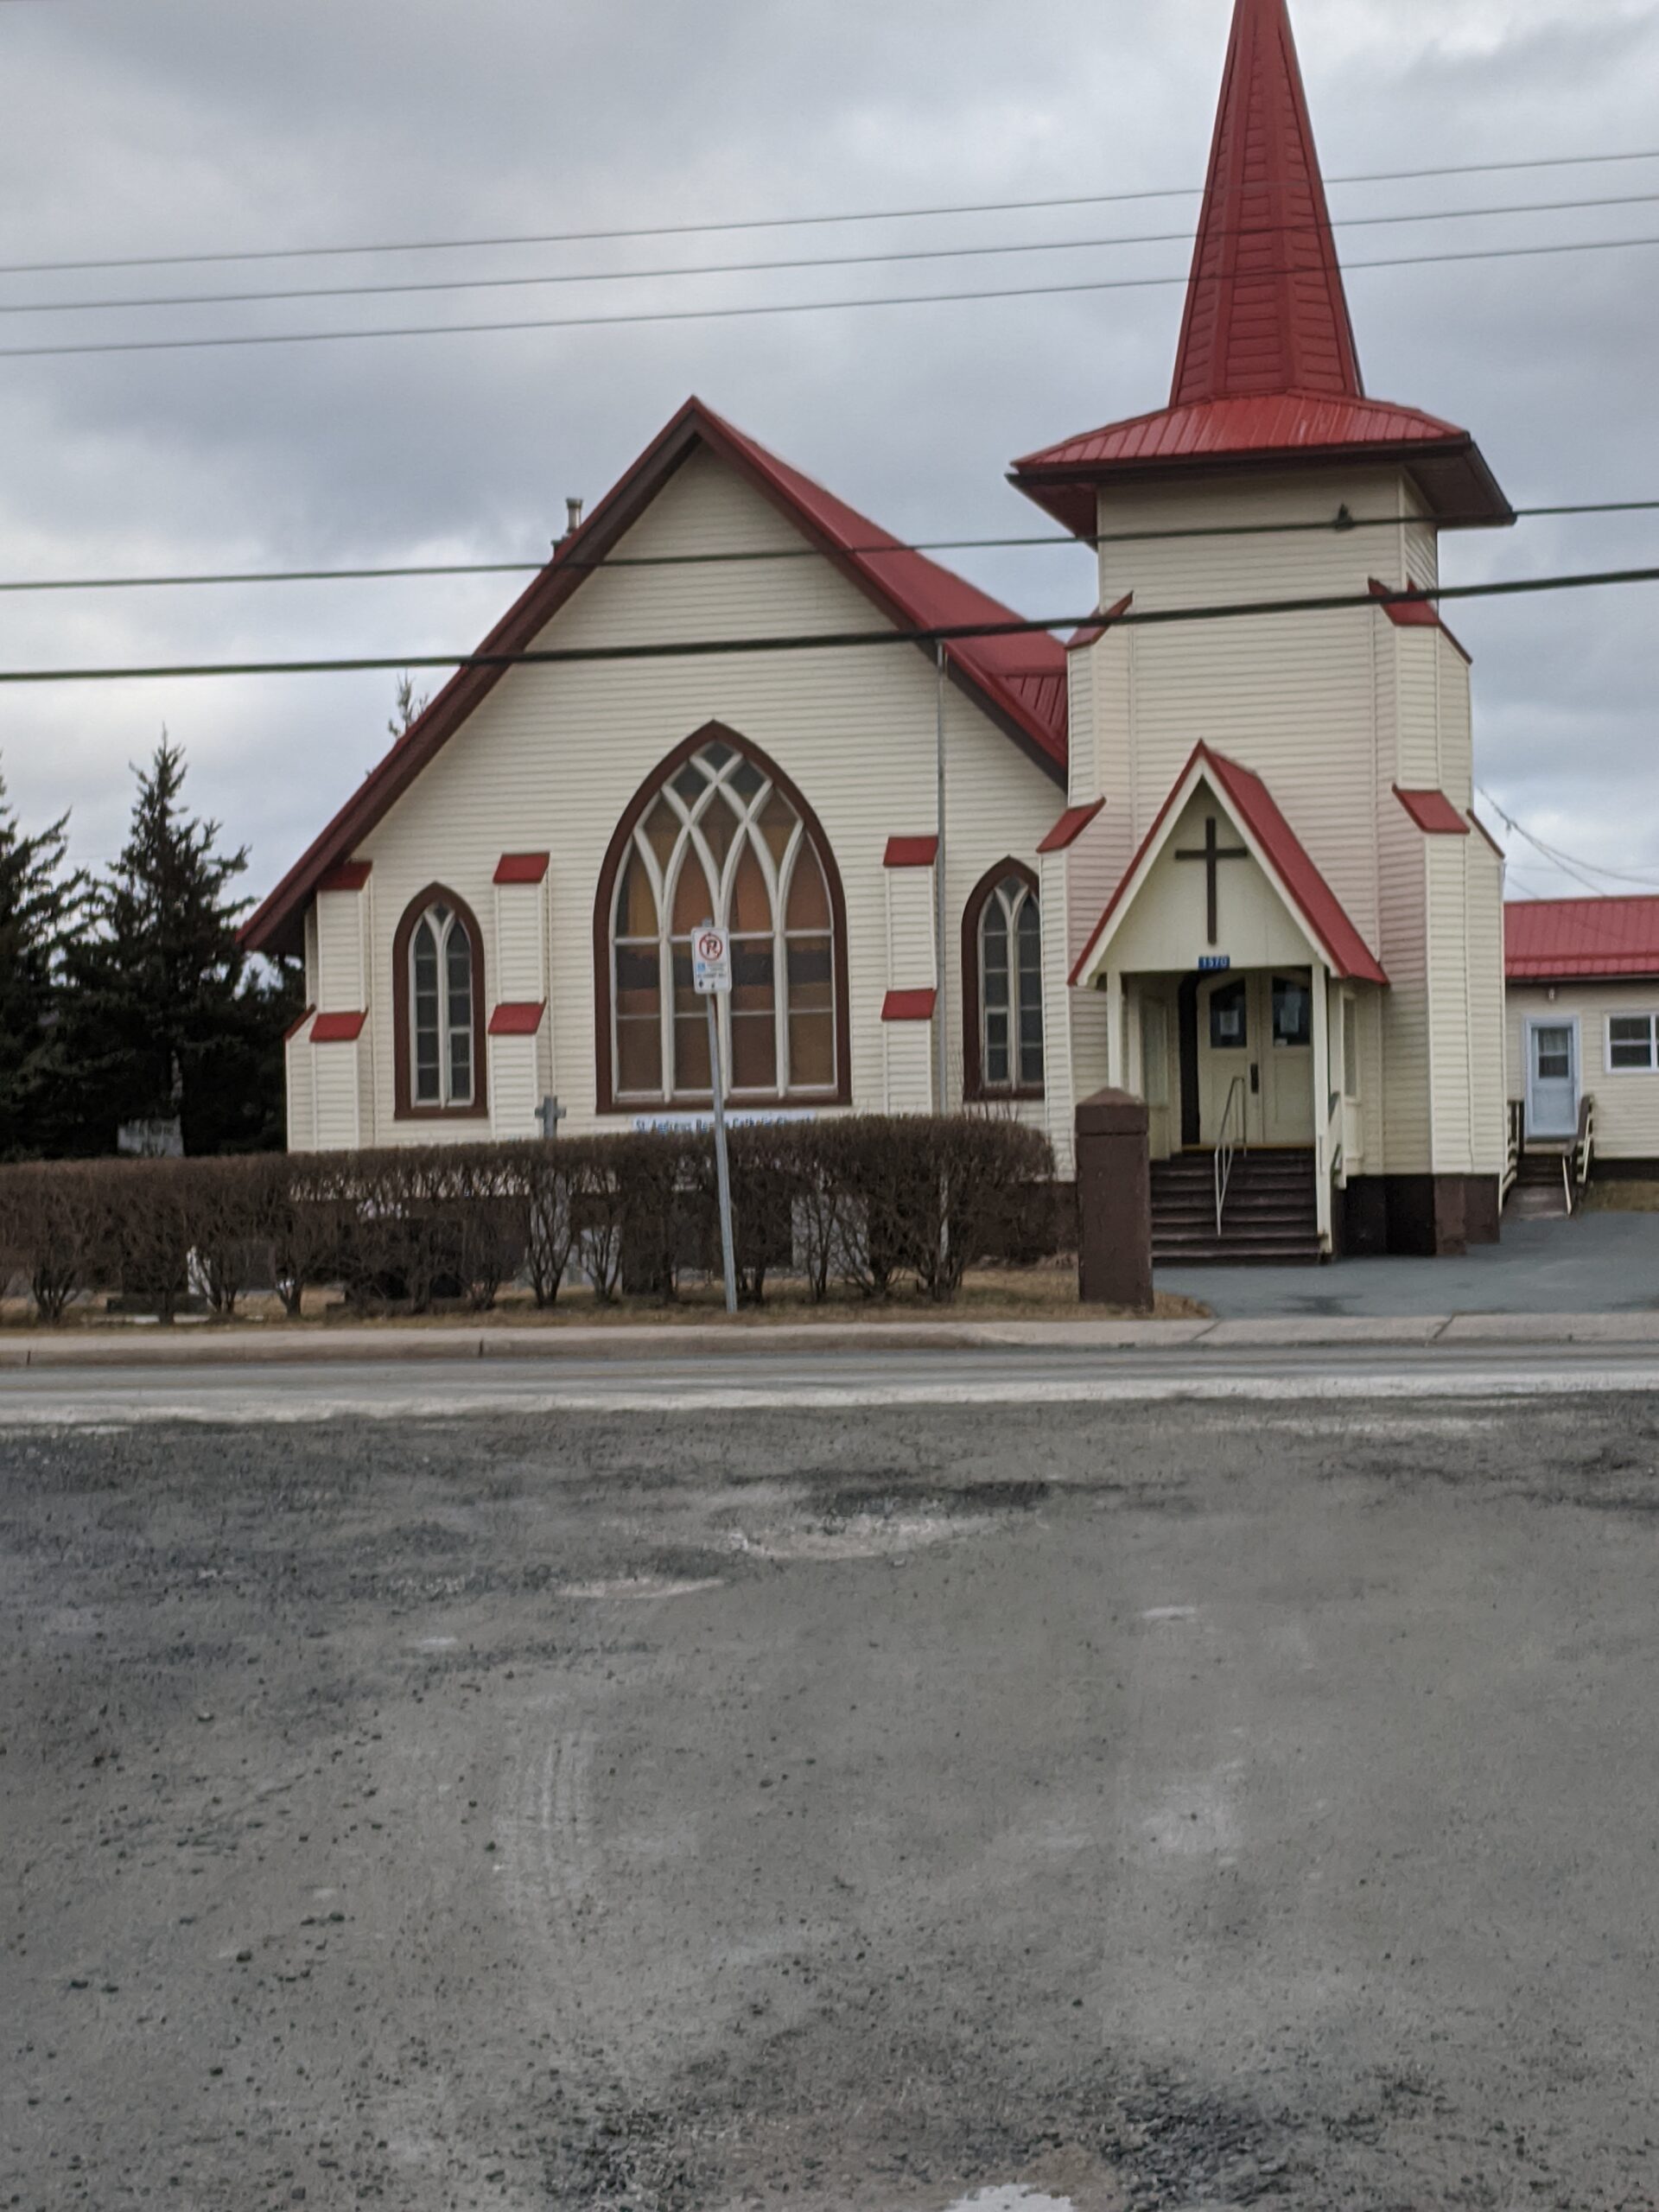 Even this road side church looks festive in Fishermen's Cove